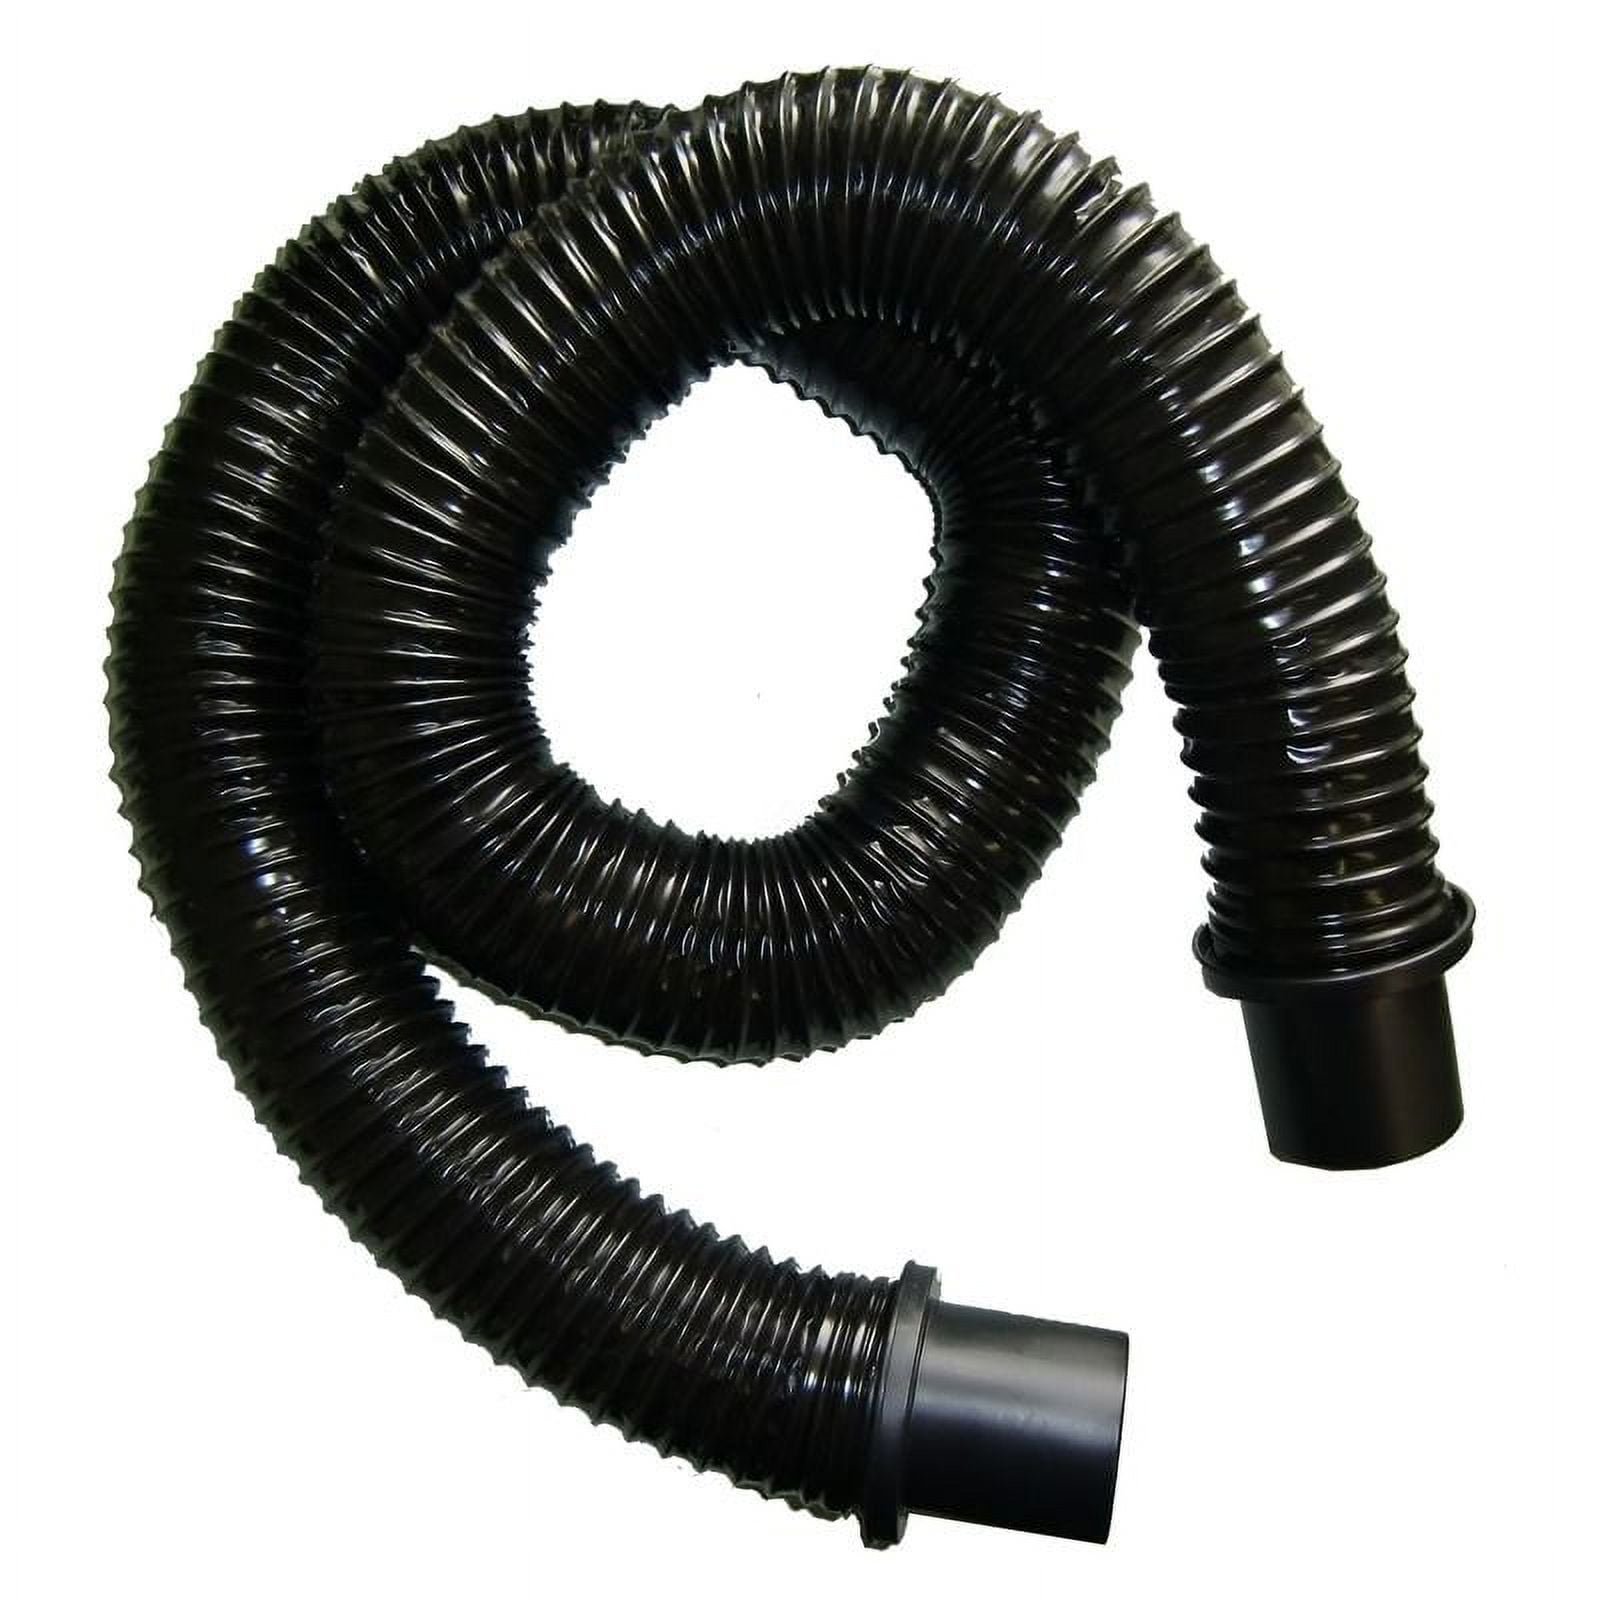 6 FT Hose Fits Shop-Vac, Craftsman, and Ridgid Wet & Dry Vacs with